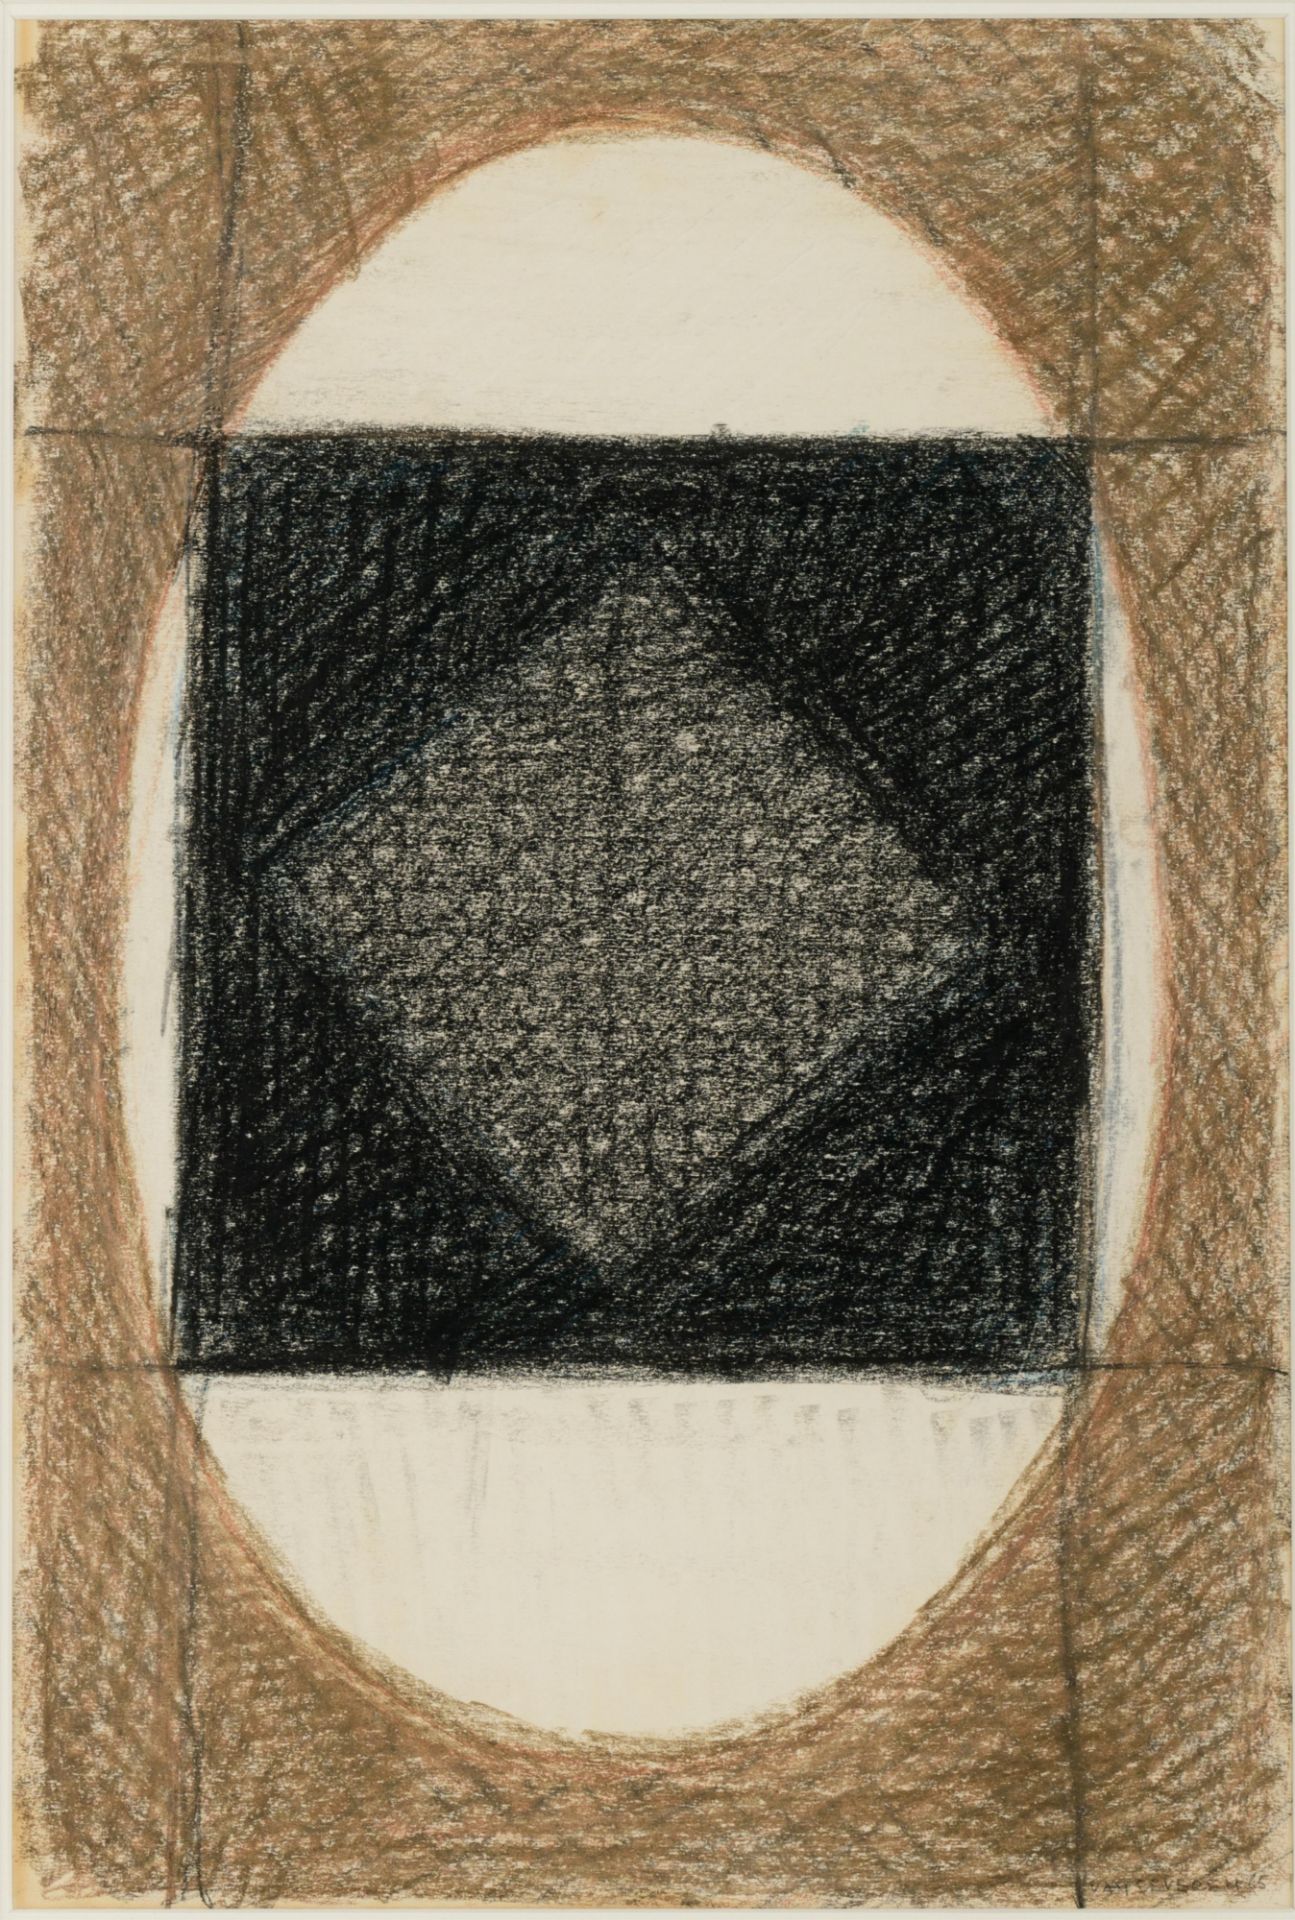 Van Severen D, an untitled geometric abstraction, charcoal and crayon on paper, 29 x 43 cm, Is possi